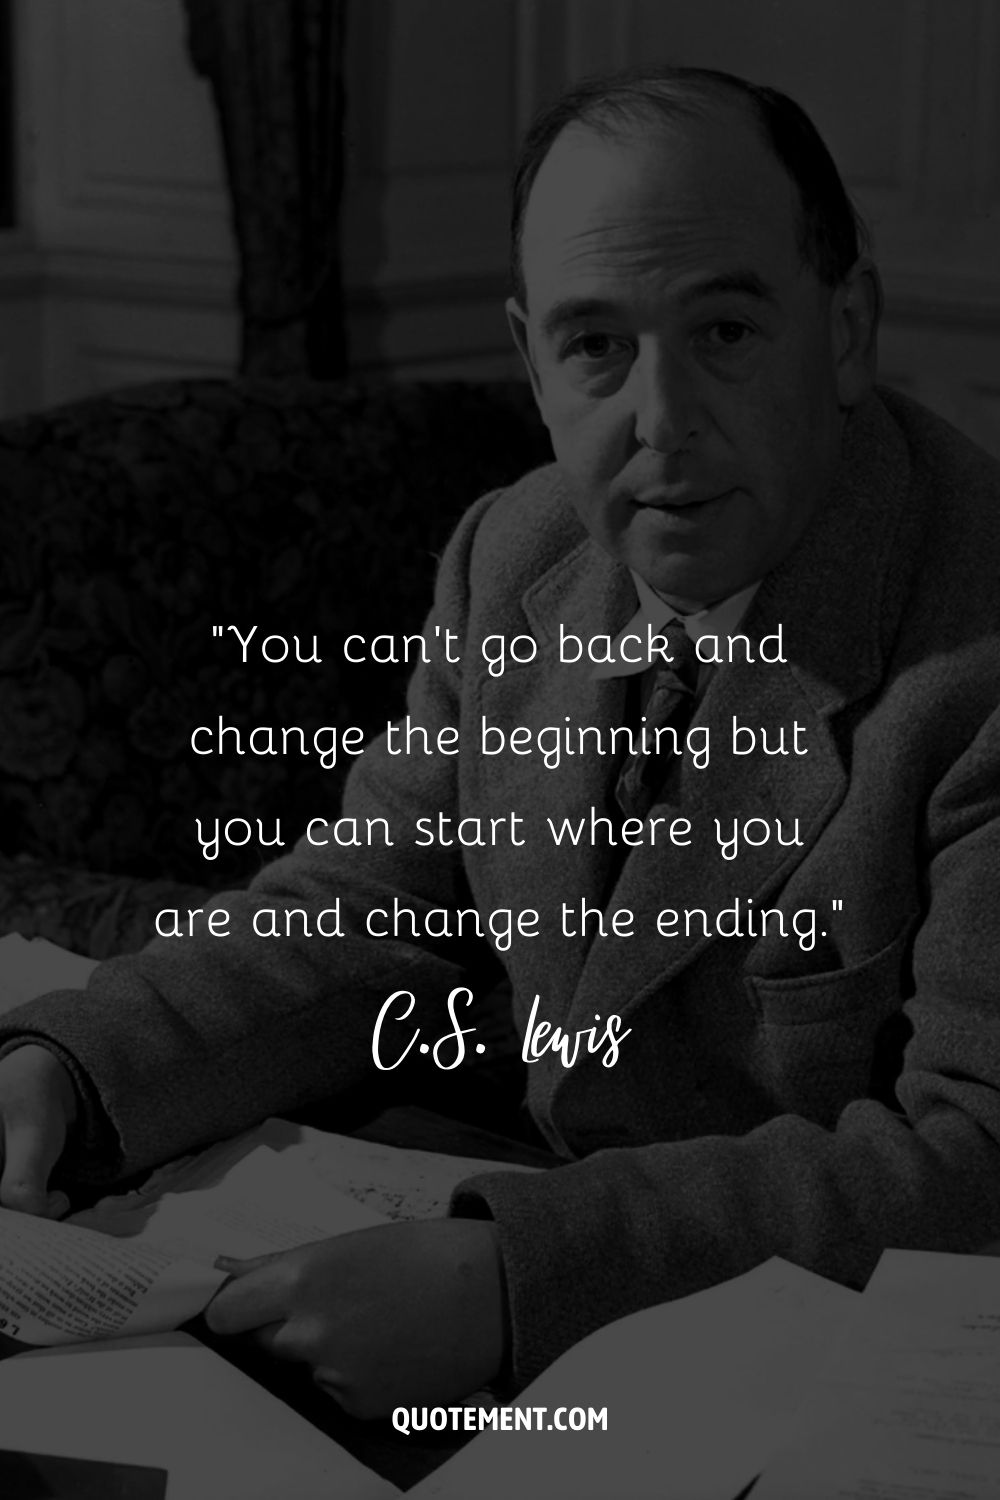 C.S. Lewis with a script in his hands representing the best C.S. Lewis quote